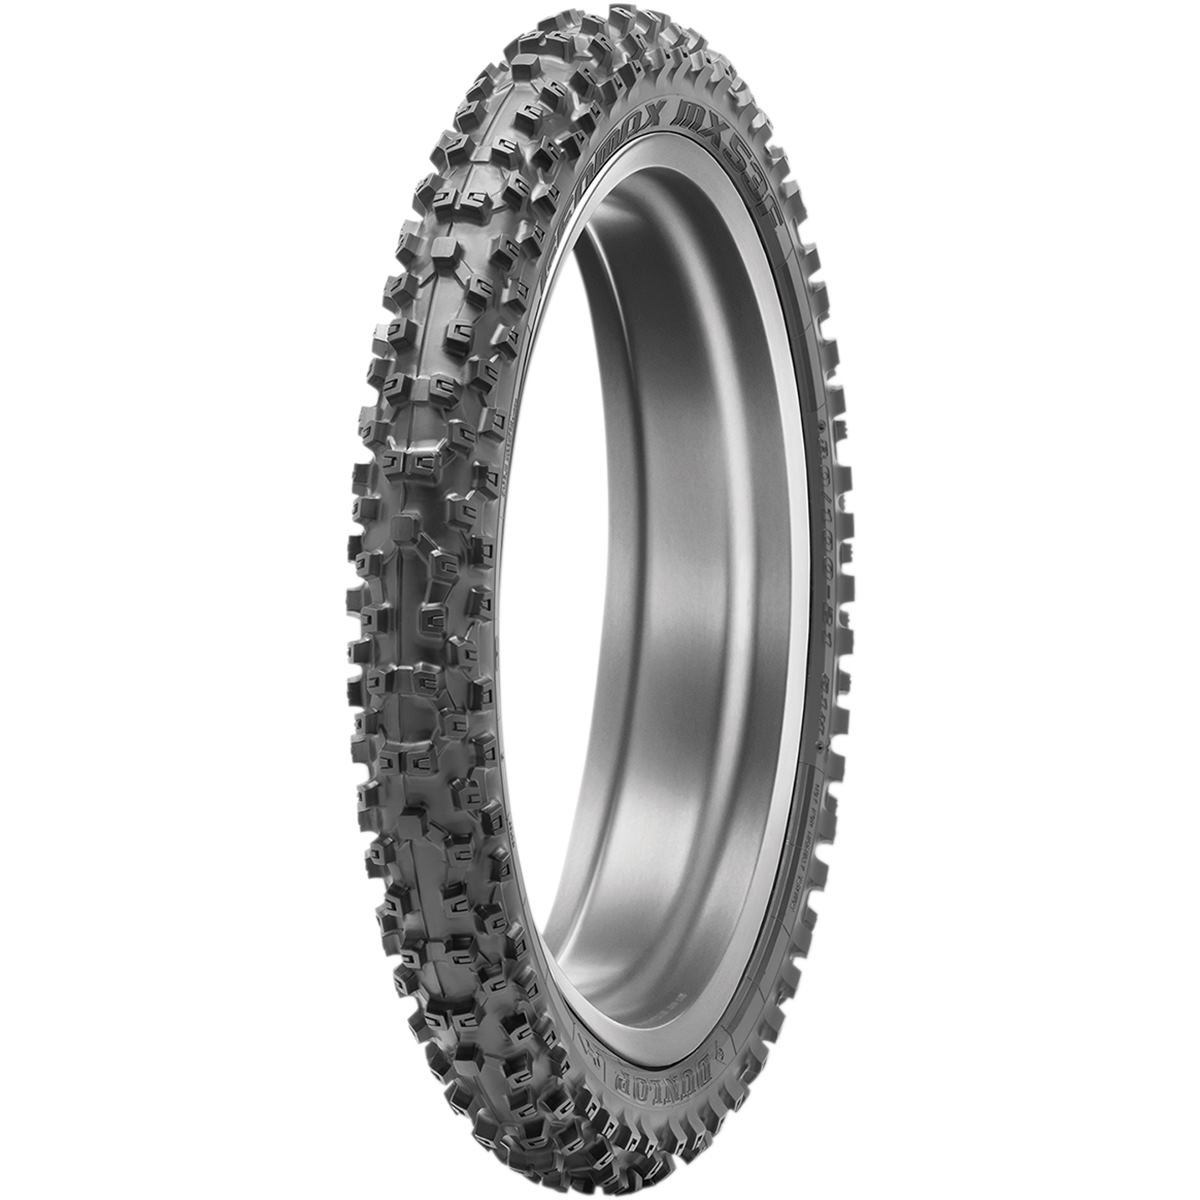 Dunlop Front Tire Geomax MX53 70/100-17